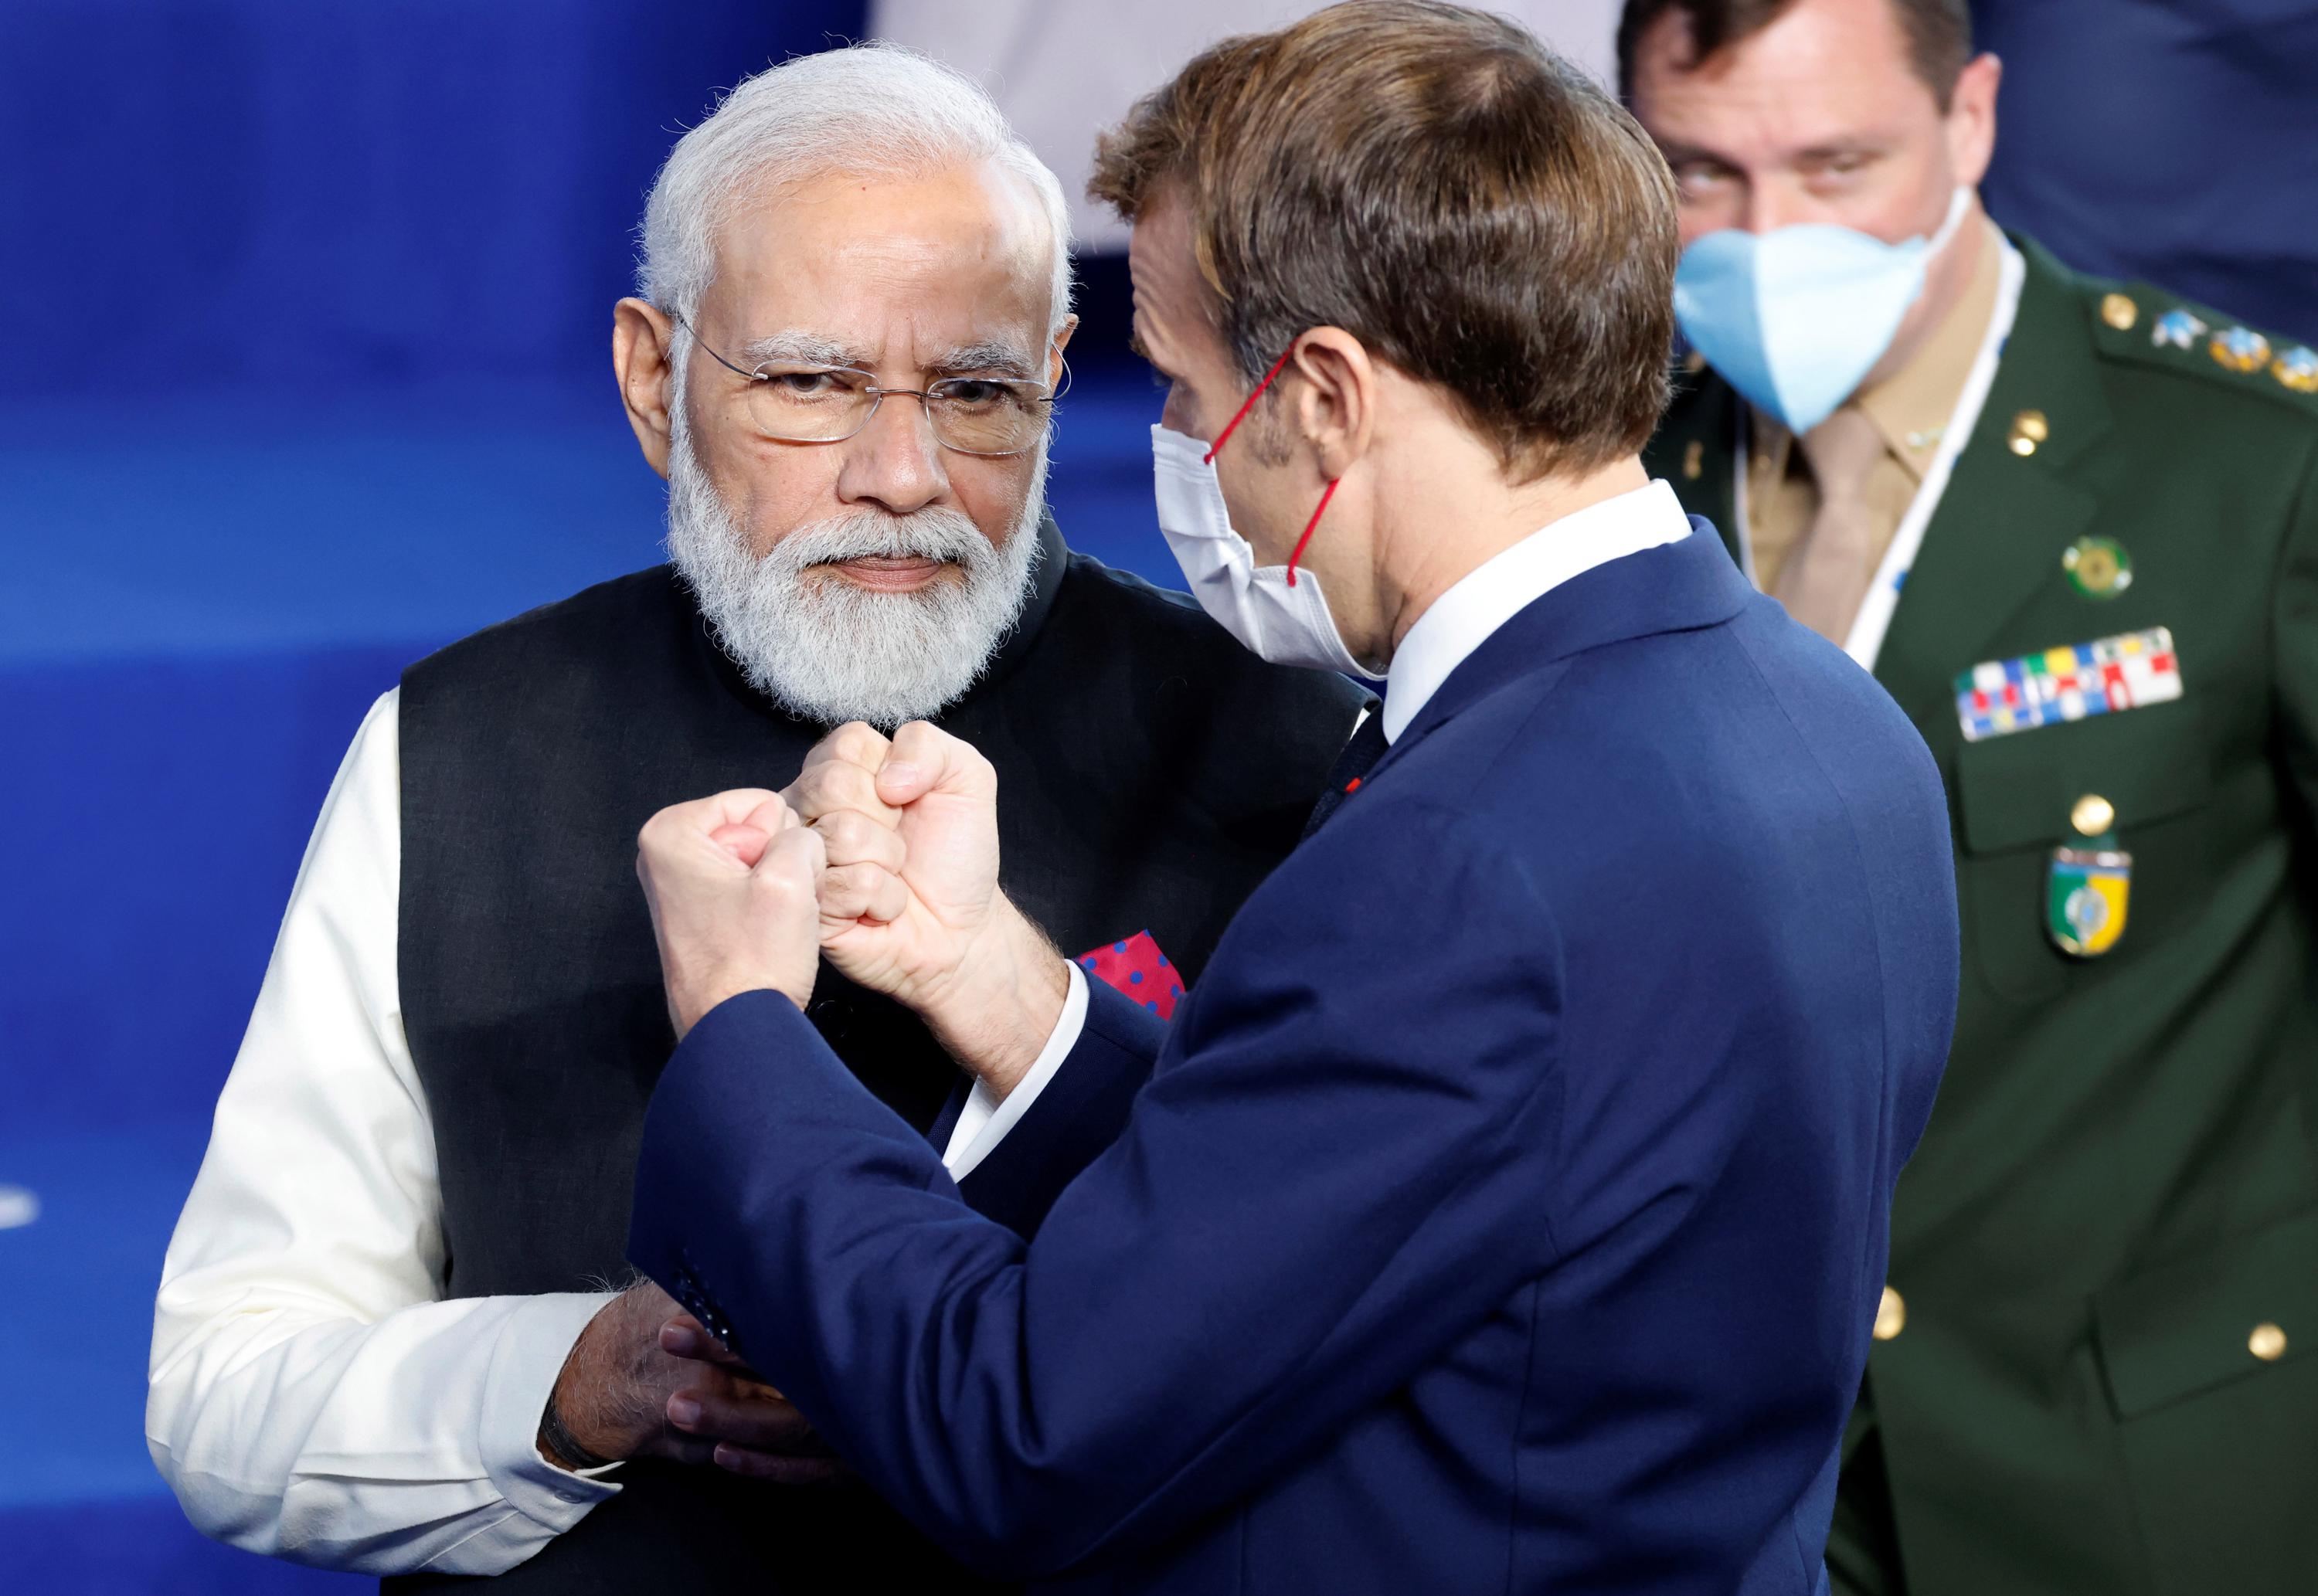 The Latest: France, India agree to boost Indo-Pacific ties